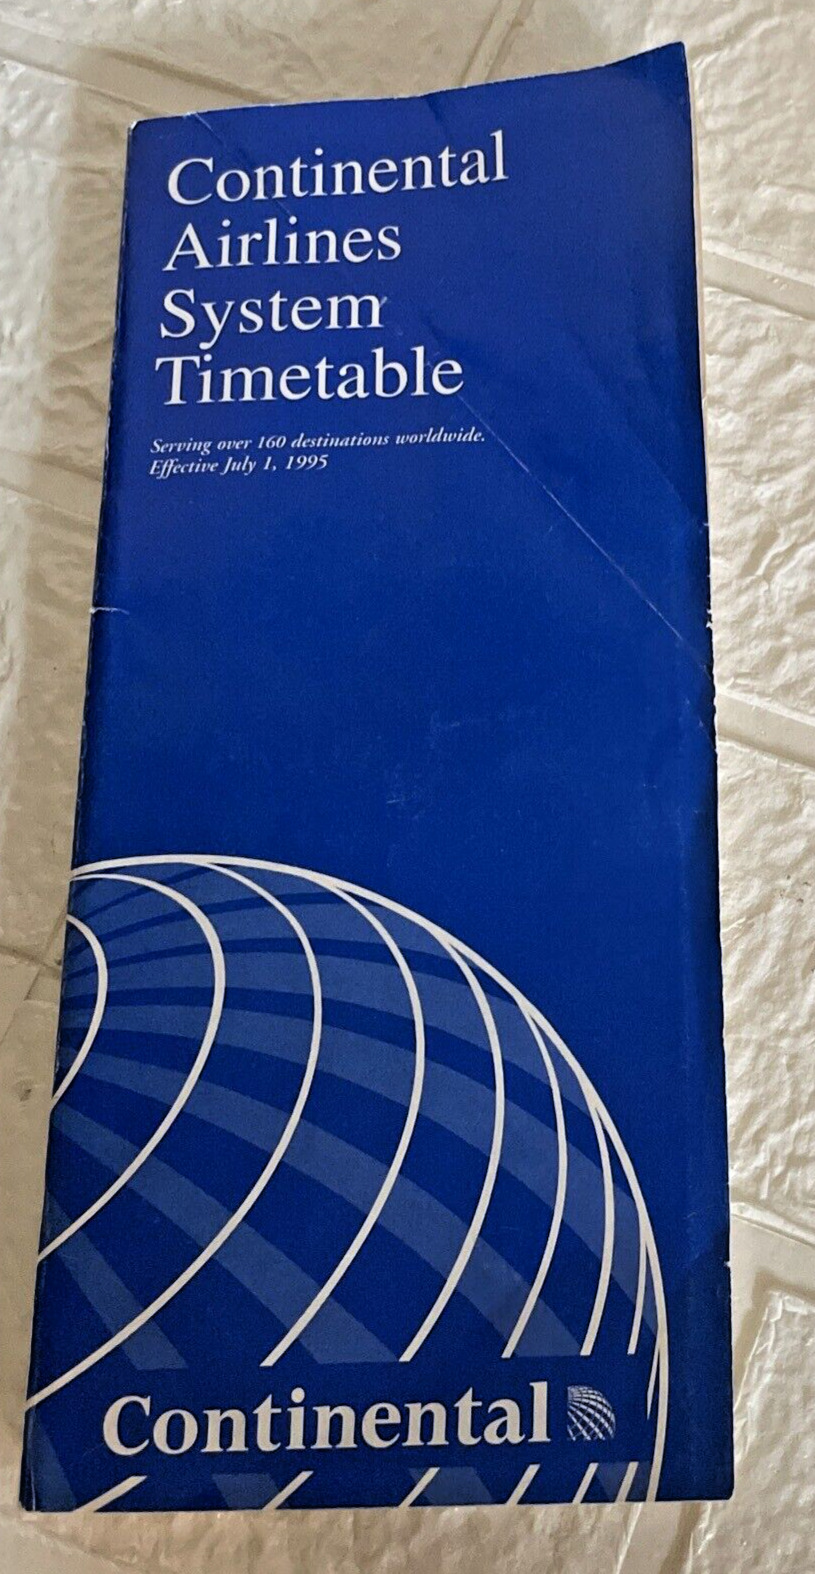 CONTINENTAL AIRLINES - SYSTEM TIMETABLE - 7/1/1995 + Postcard